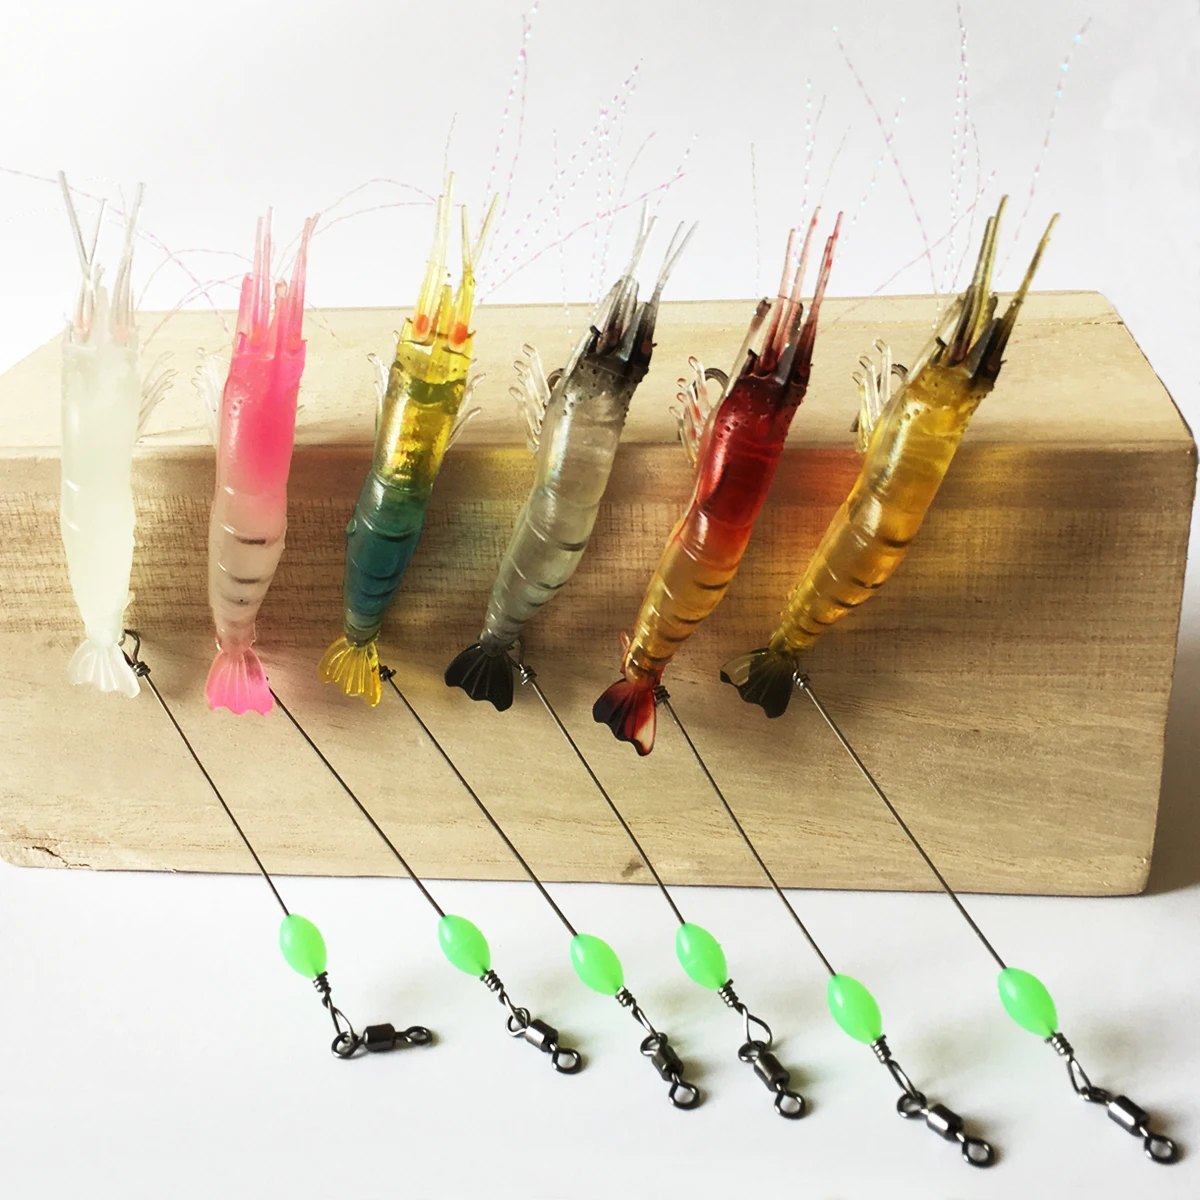 

9.5cm 6g Artificial Silicone Soft Bait Luminous Shrimp Mixed Color Spinner Crank-Bait Fishing Lure with Hook Fishing Tackle 6pcs